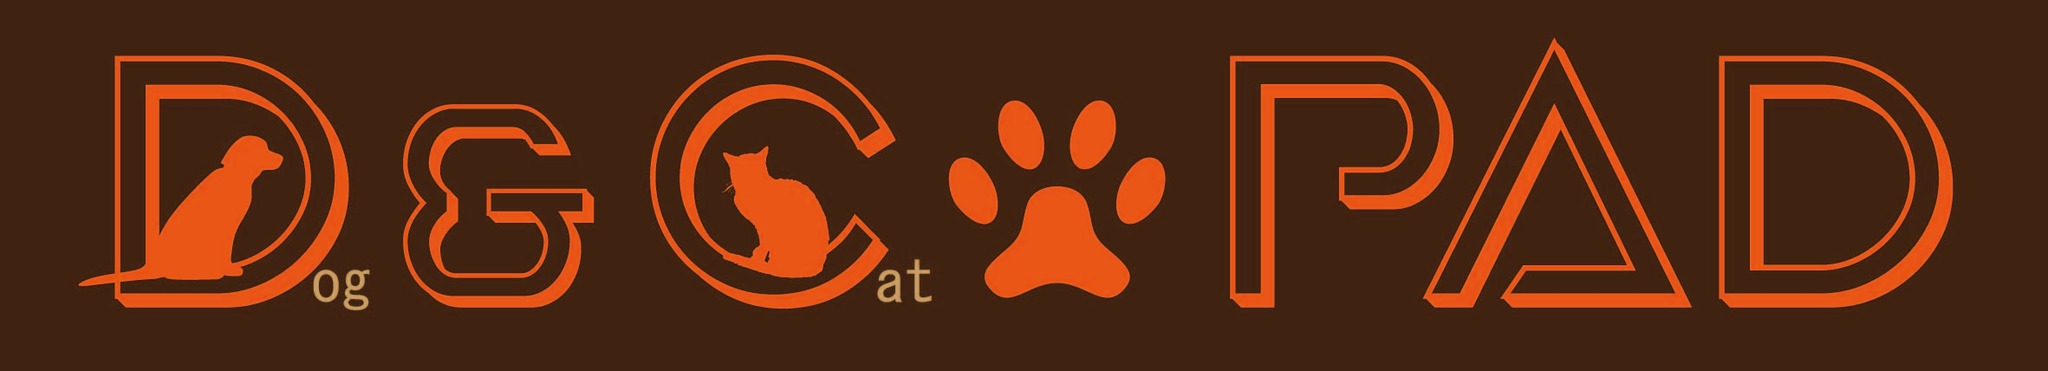 Dogs & Cats Pad